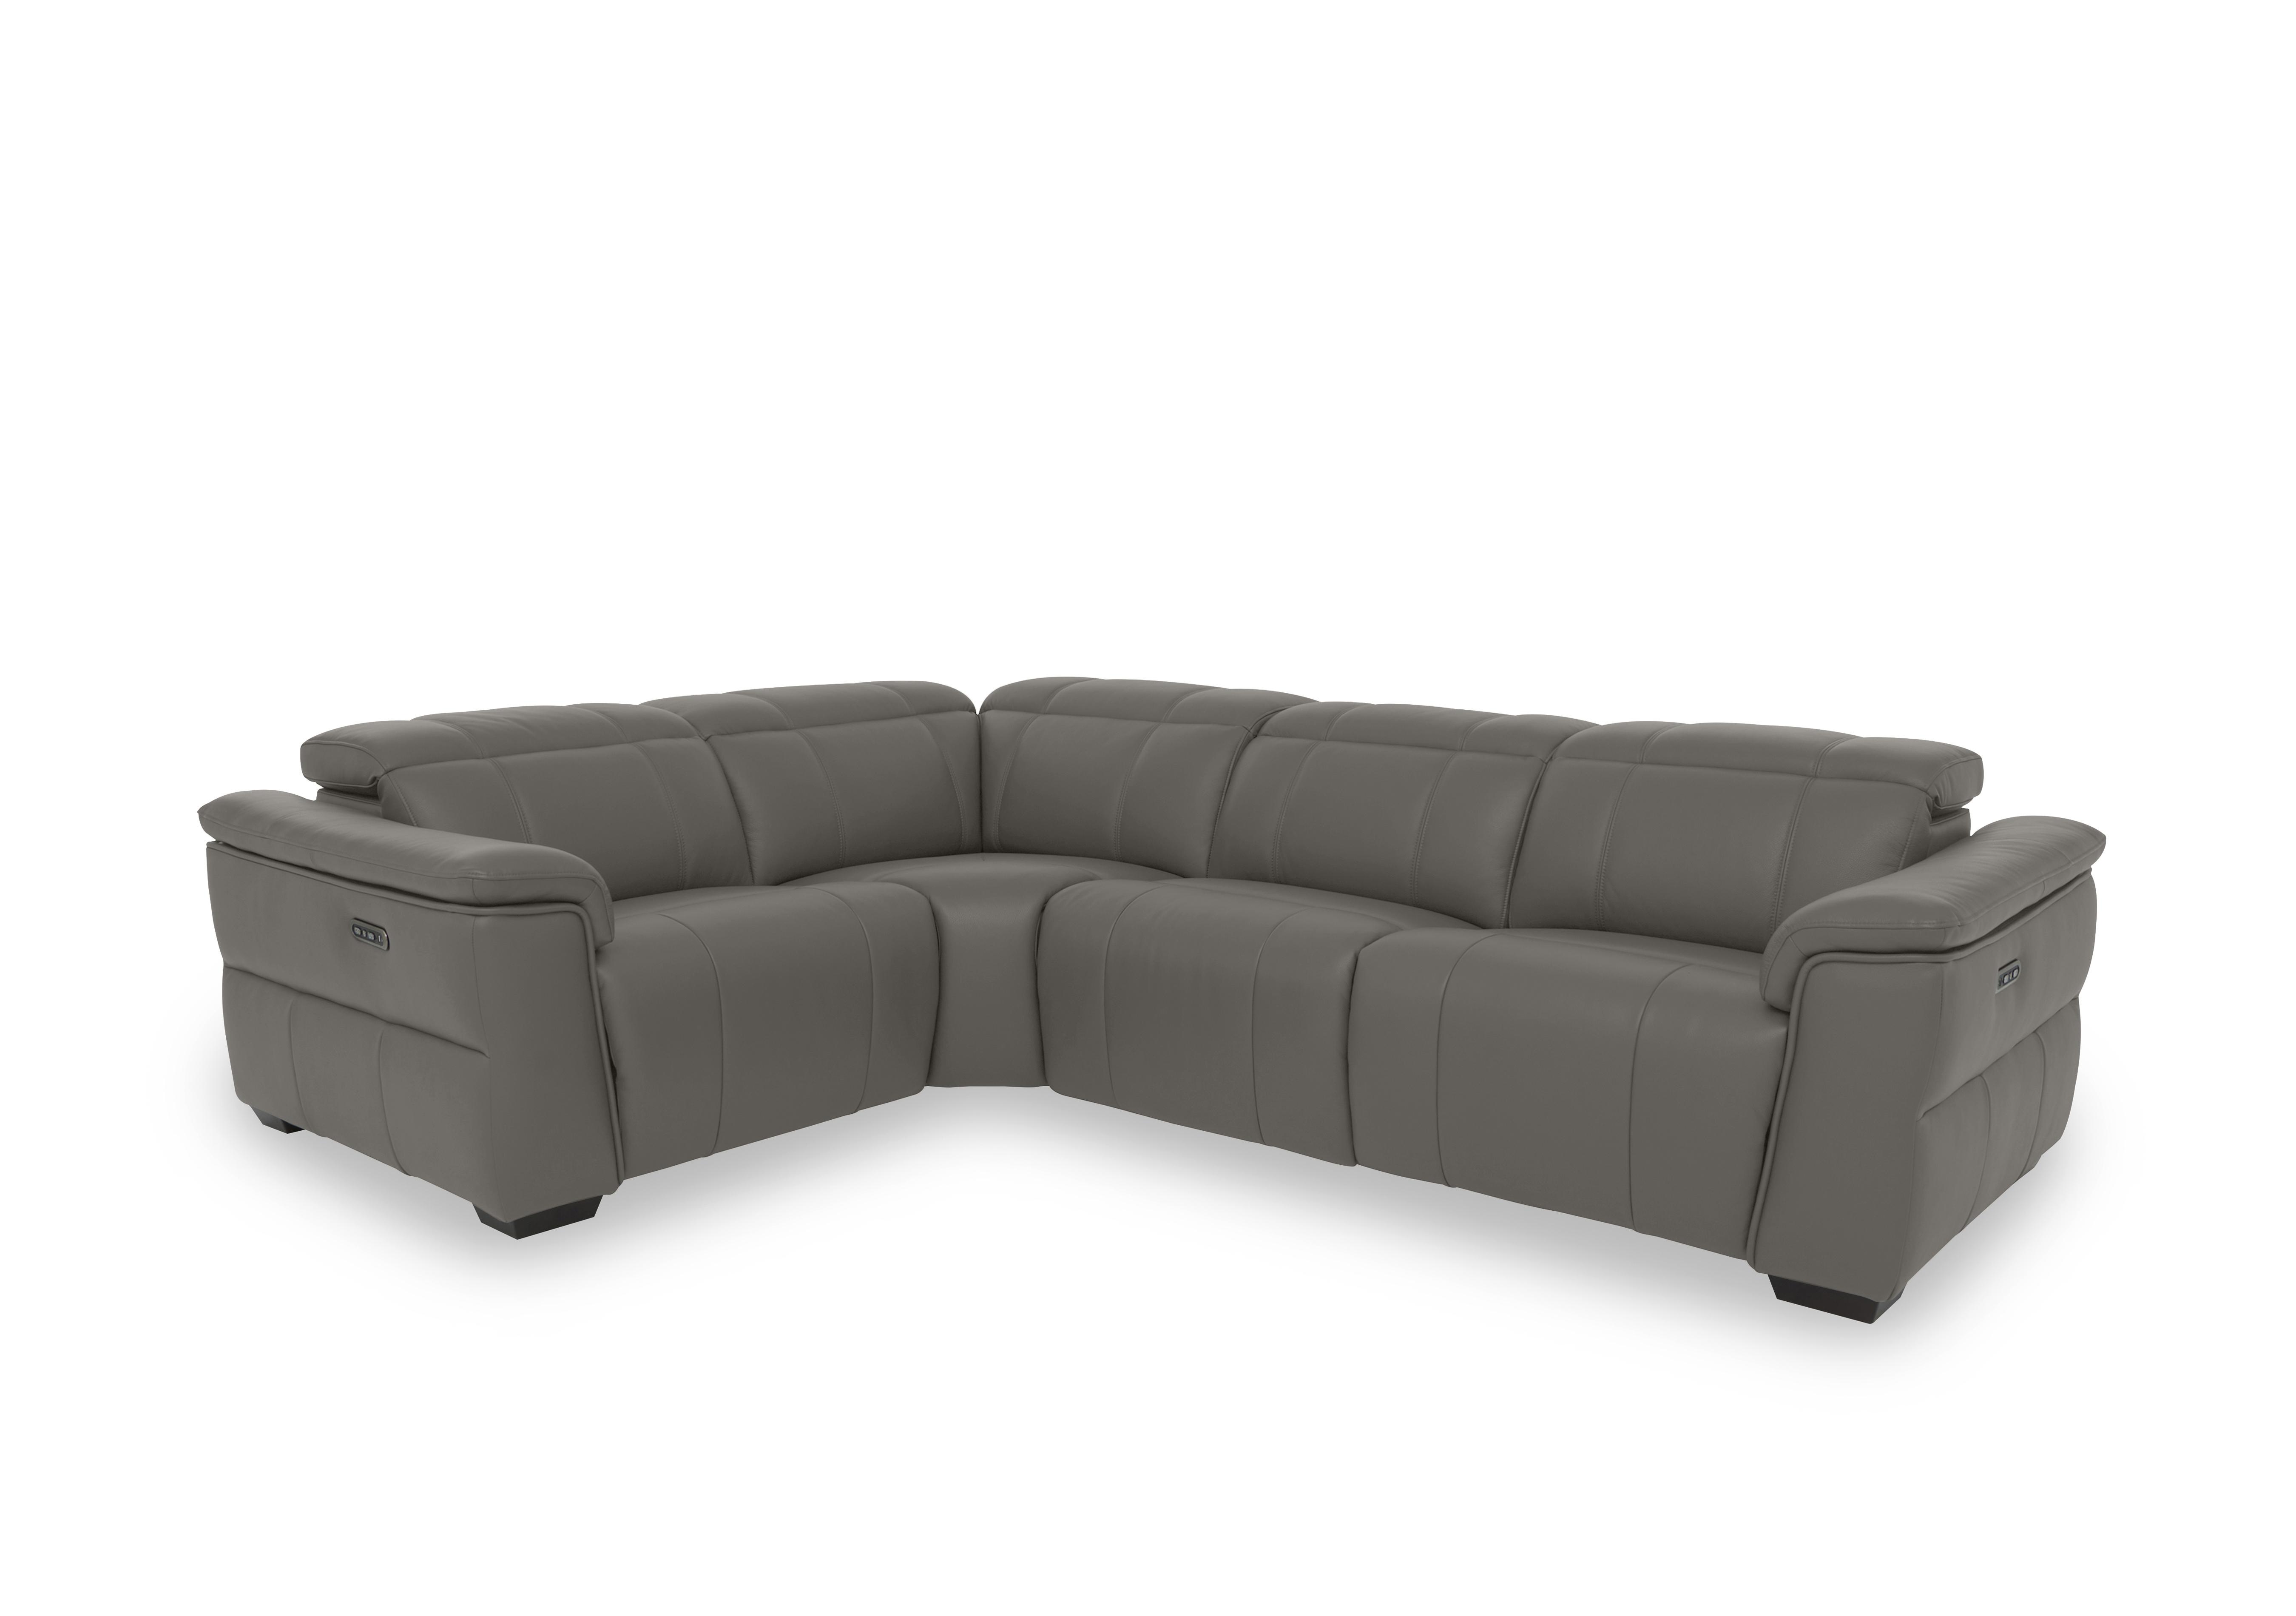 Inca Leather Double Power Recliner Corner Sofa with Power Headrests in Cat-40/15 Elephant on Furniture Village